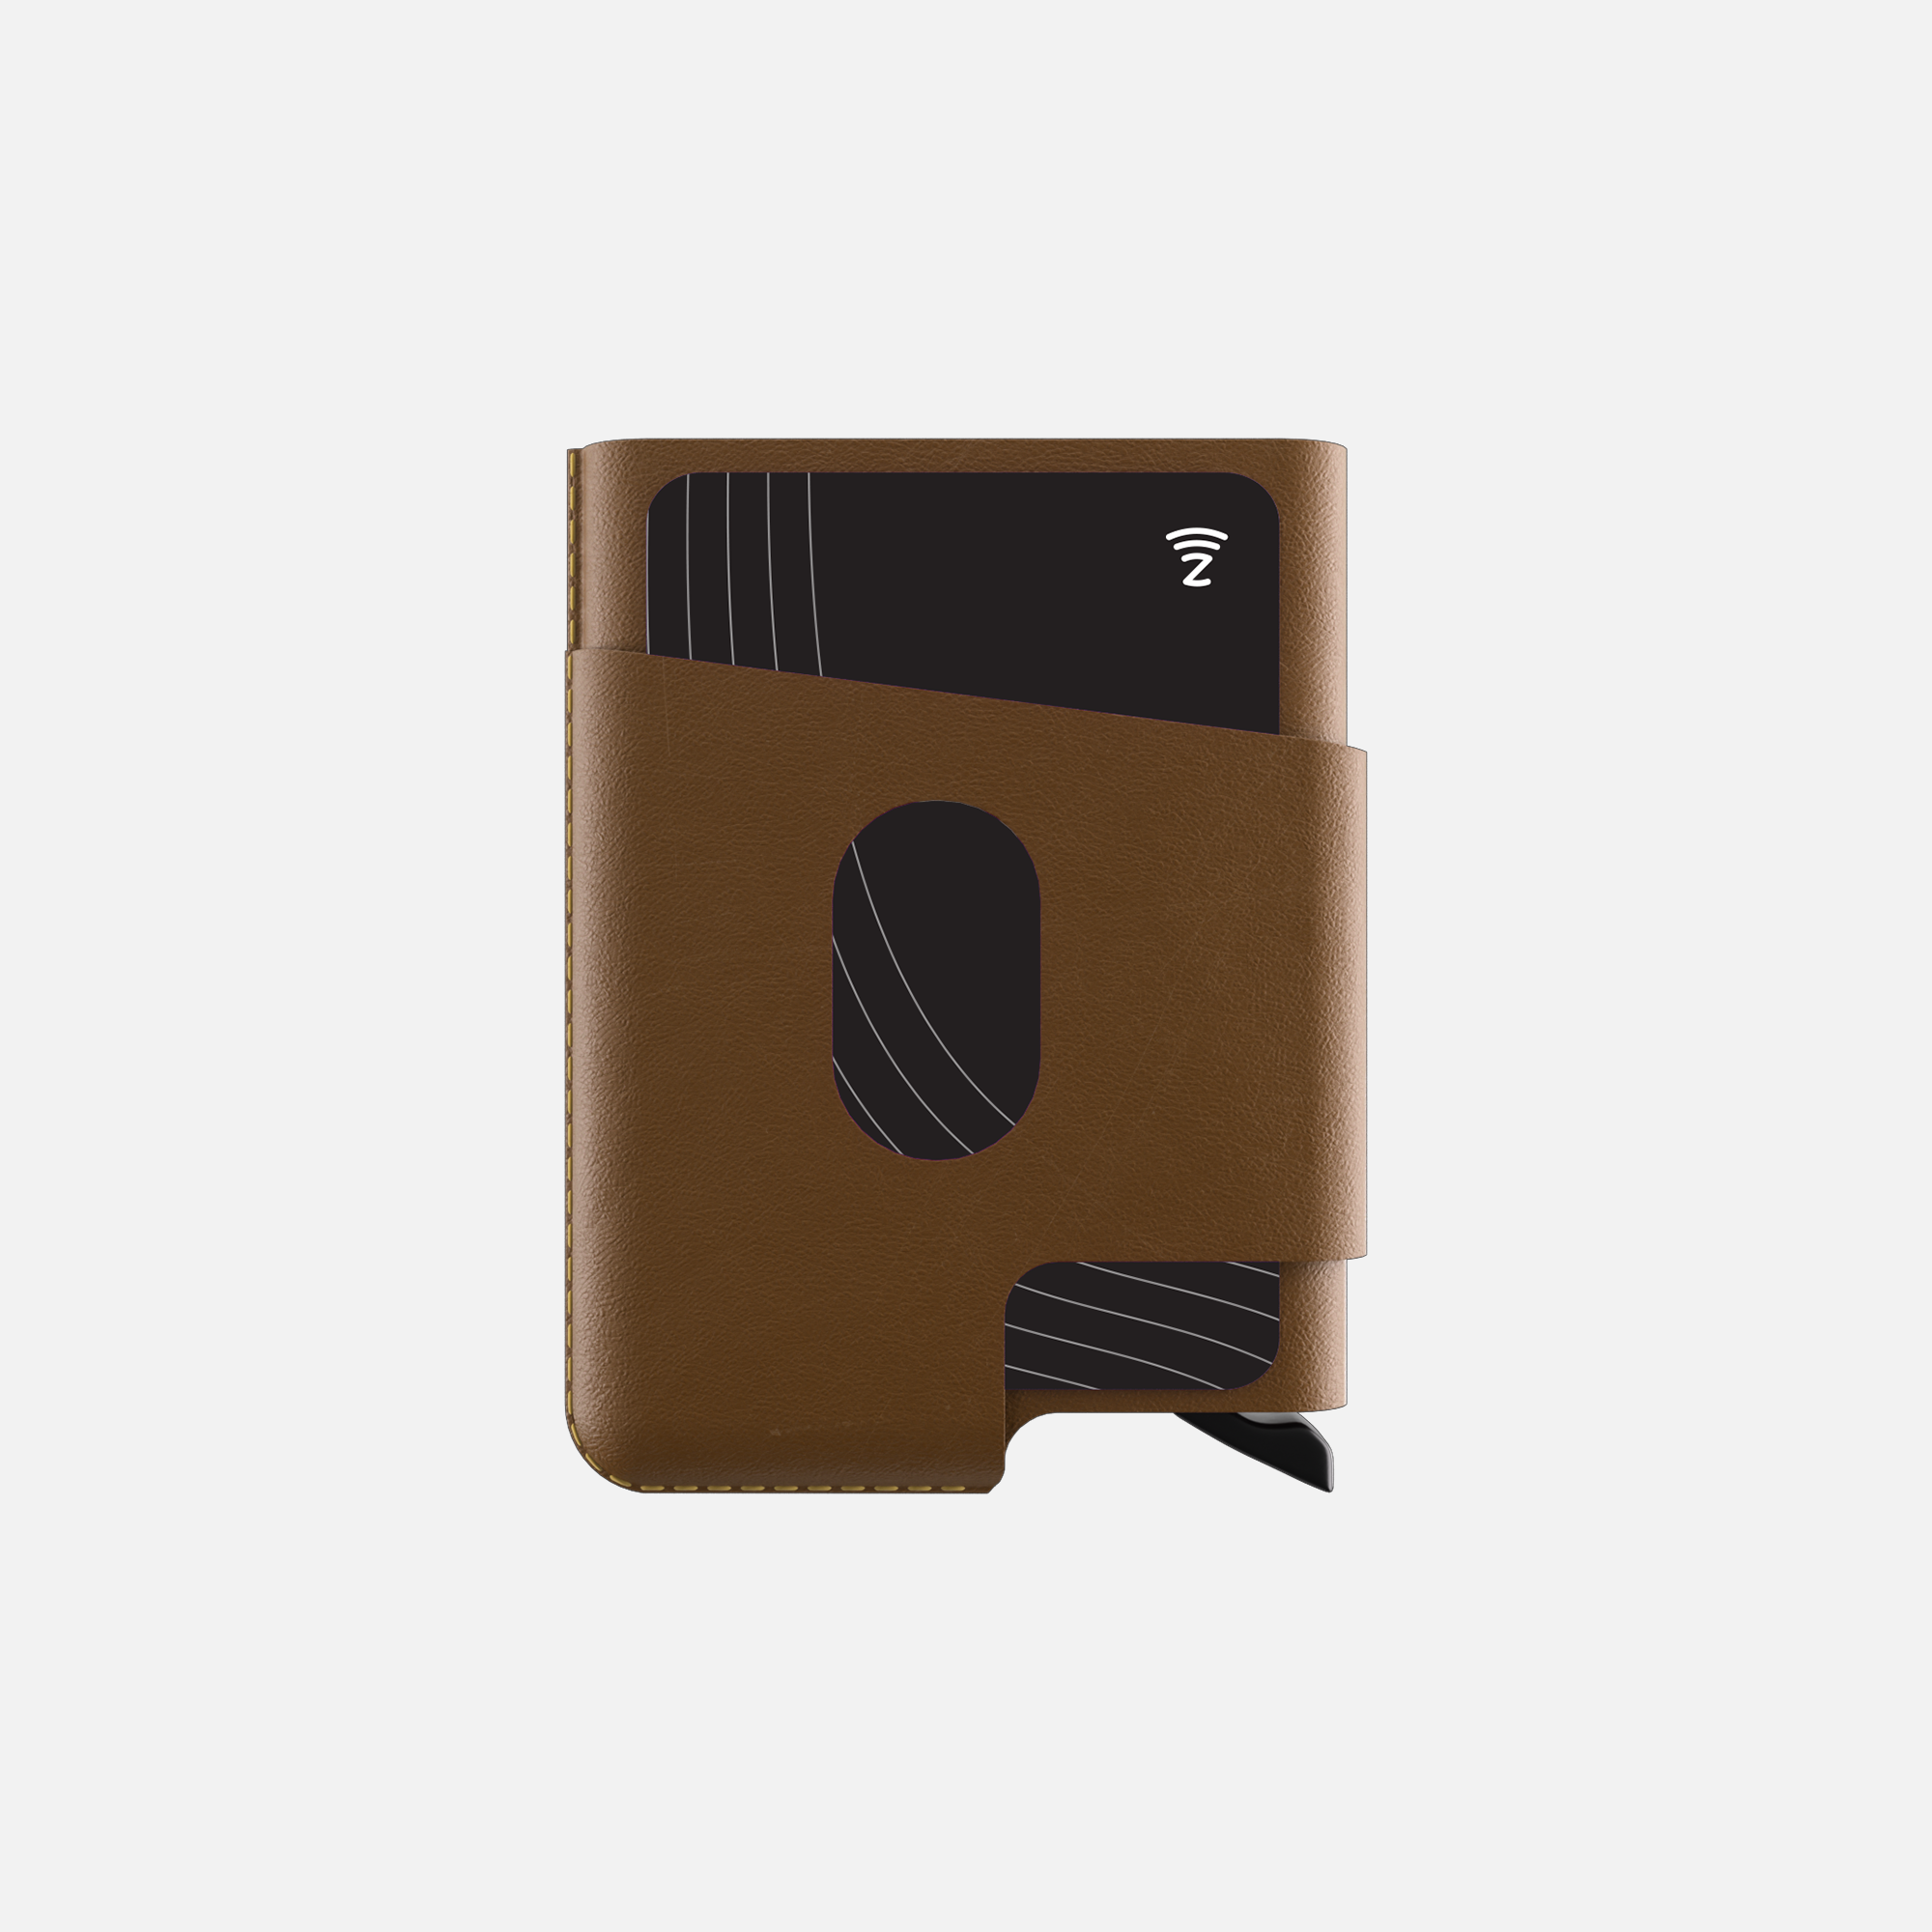 Brown leather cardholder and card slot, isolated on white background.